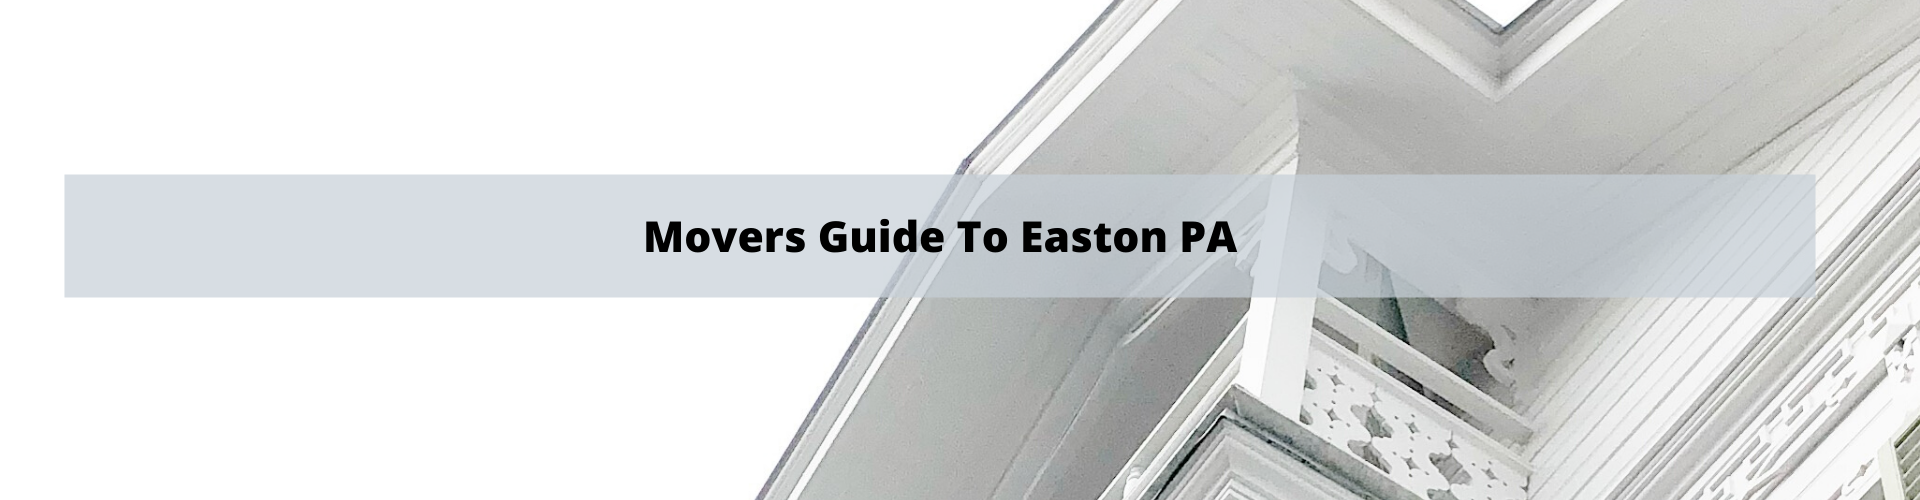 Movers Guide to Easton PA